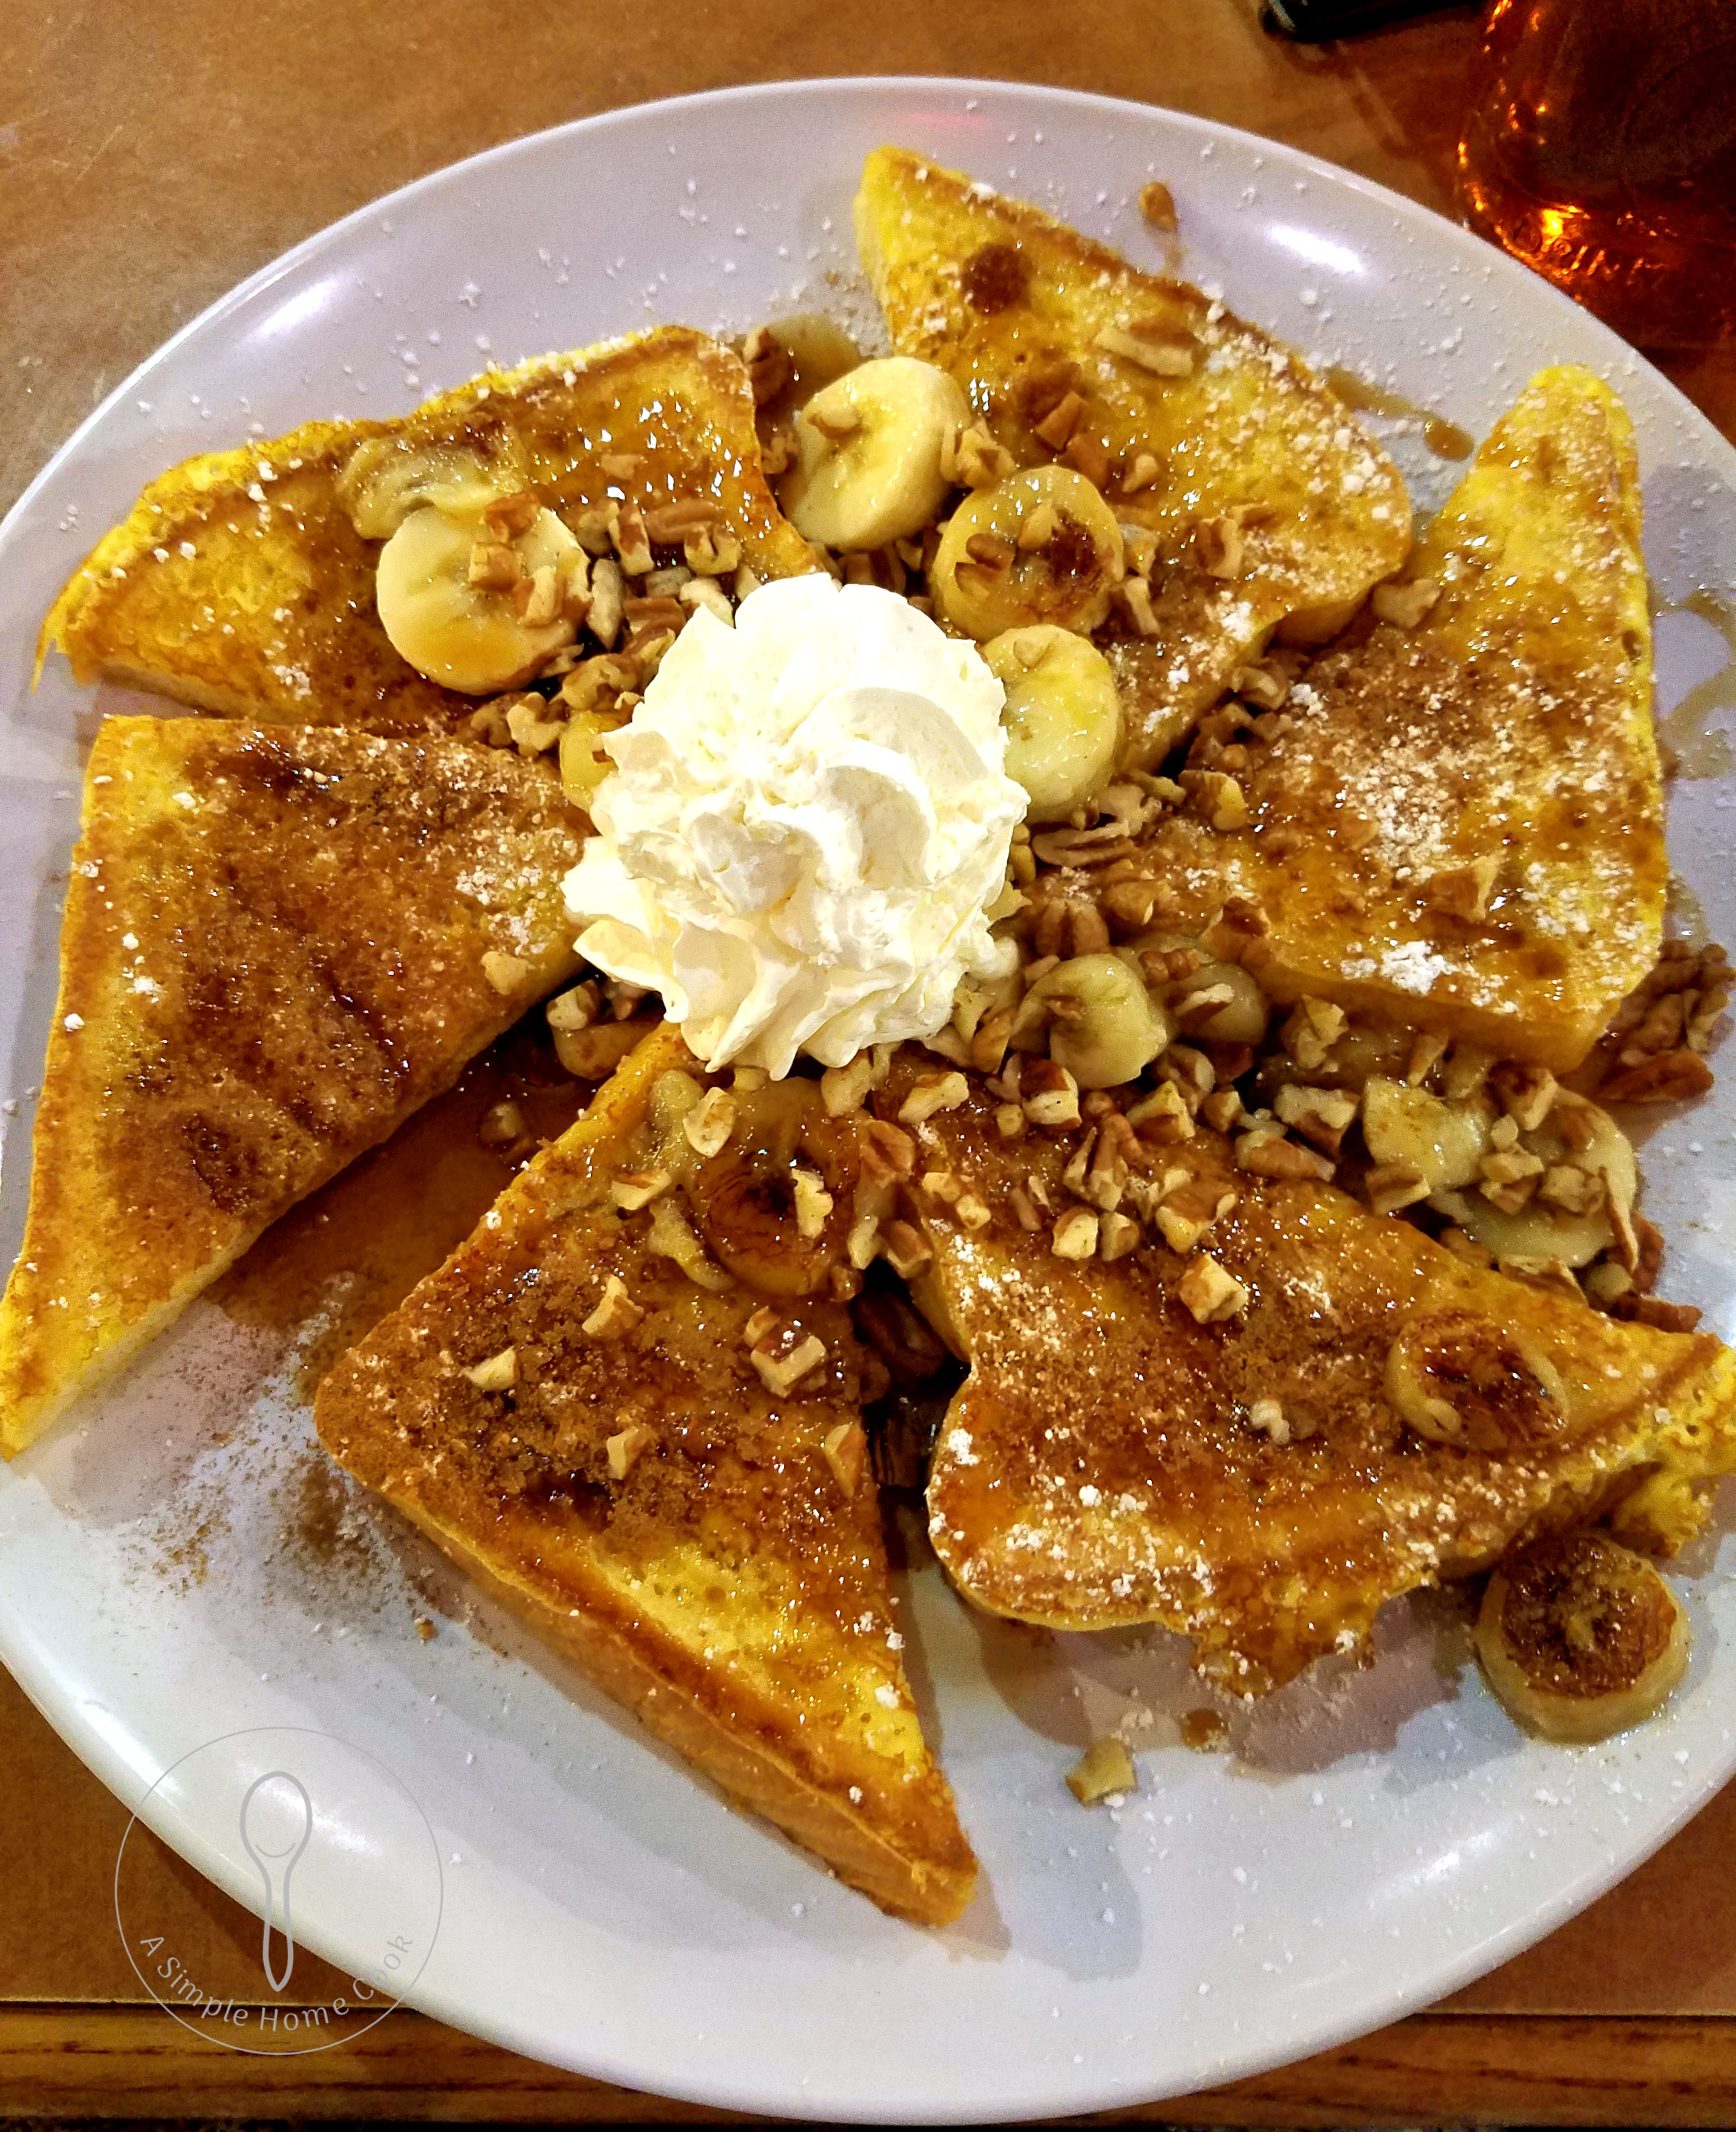 banas foster french toast